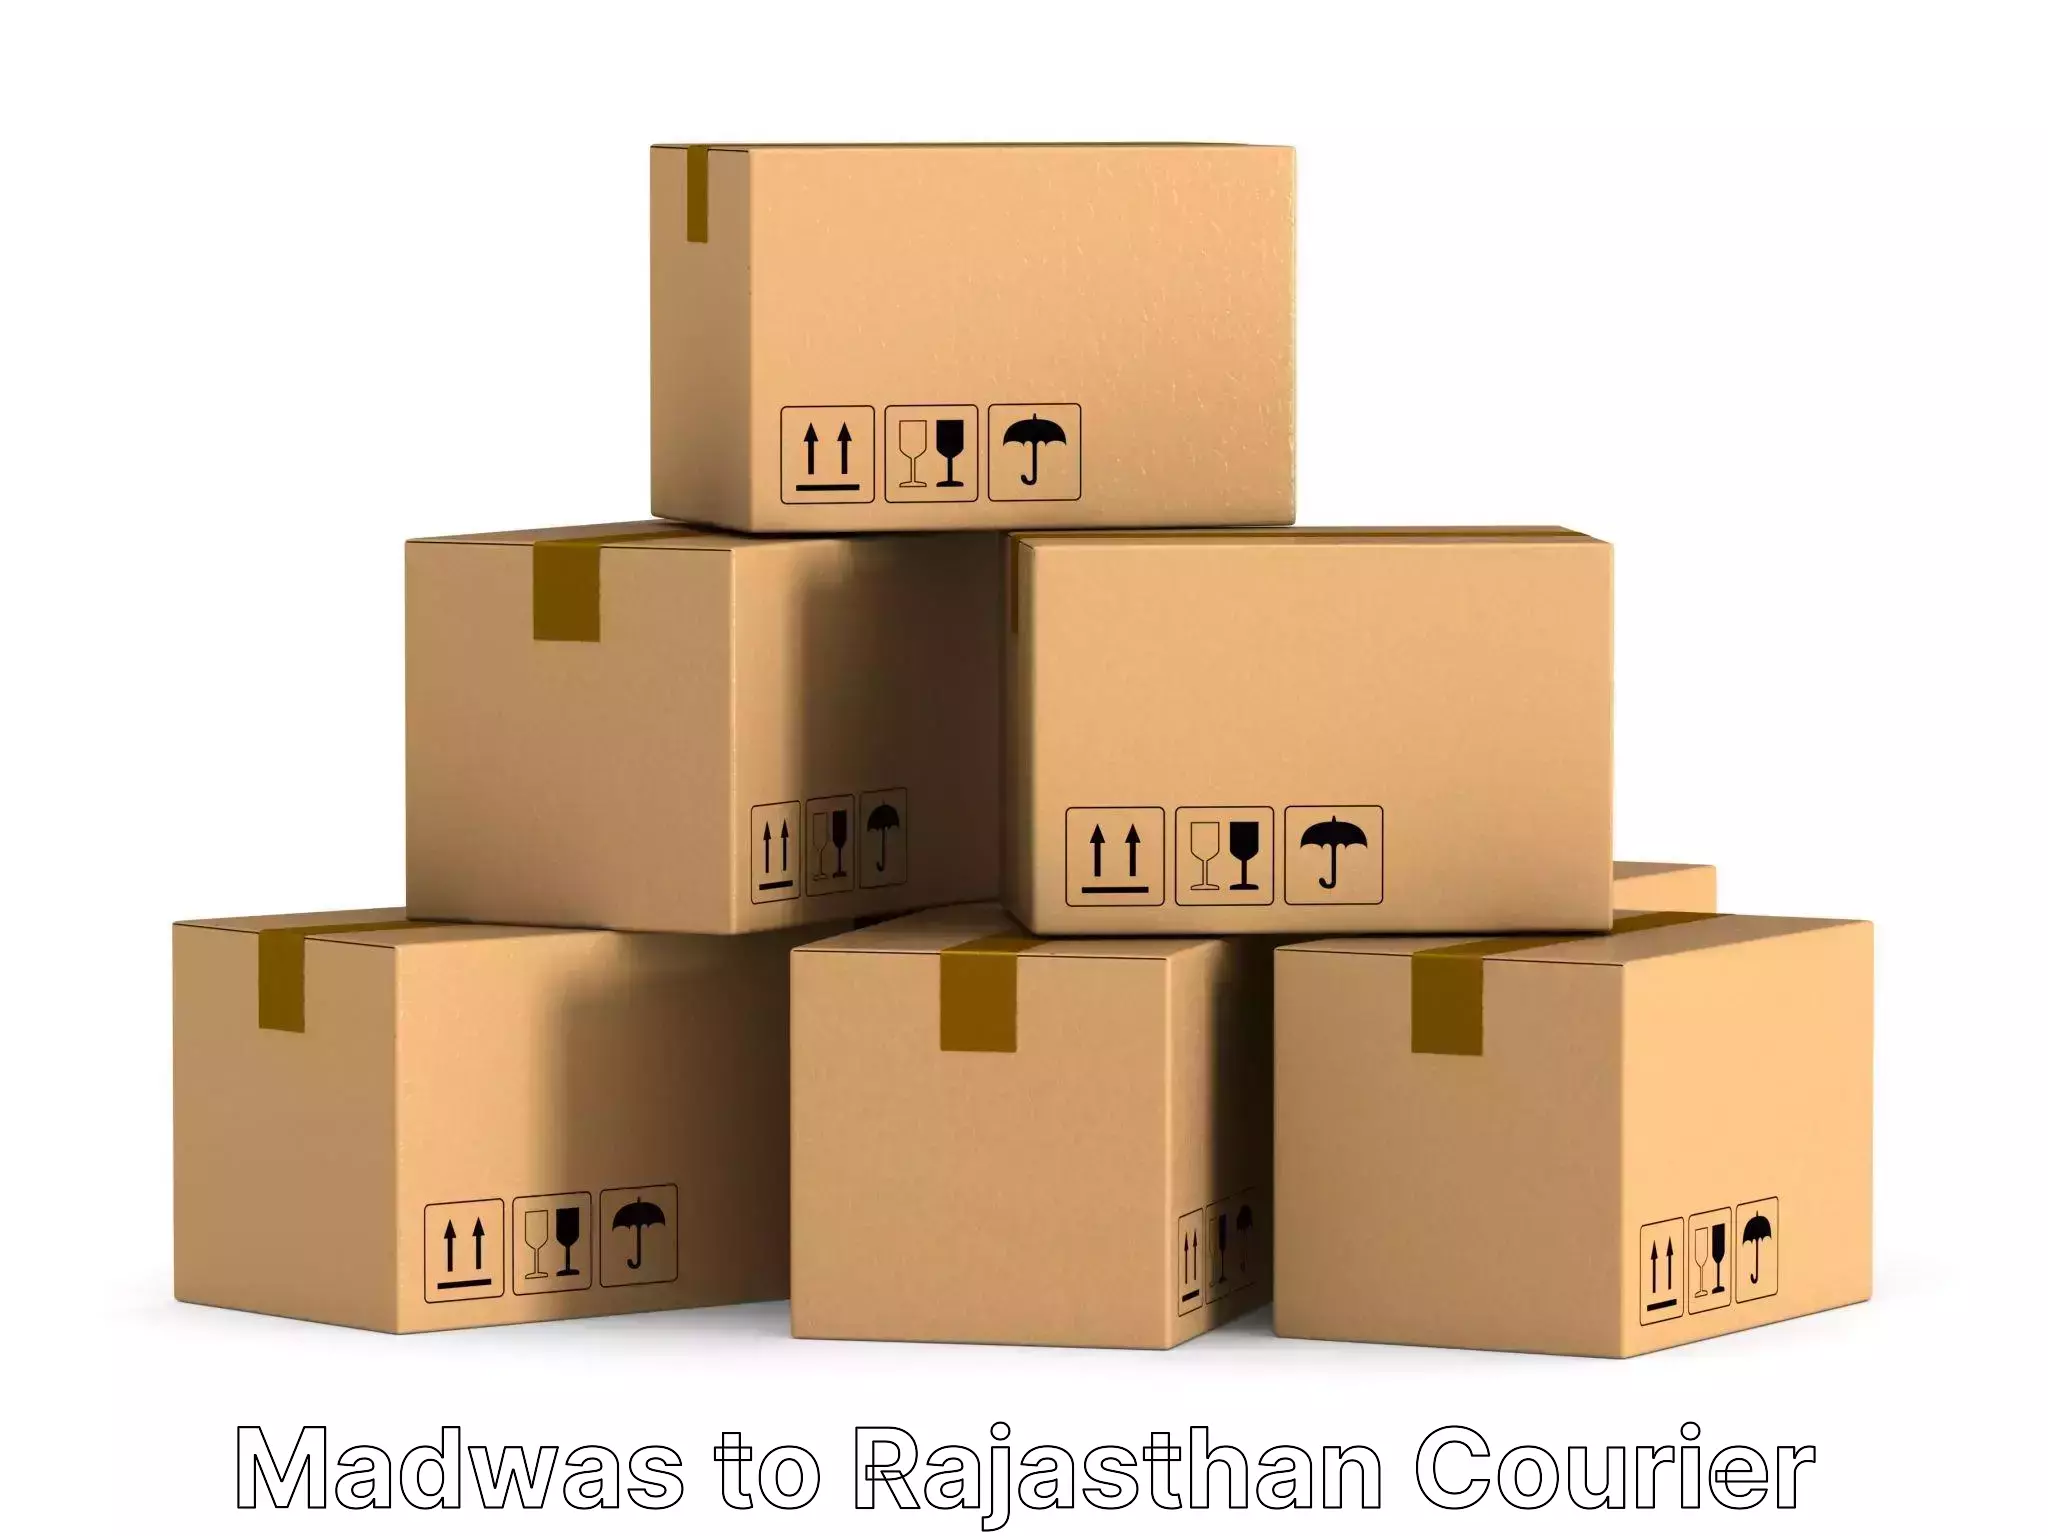 Furniture delivery service in Madwas to Rajasthan